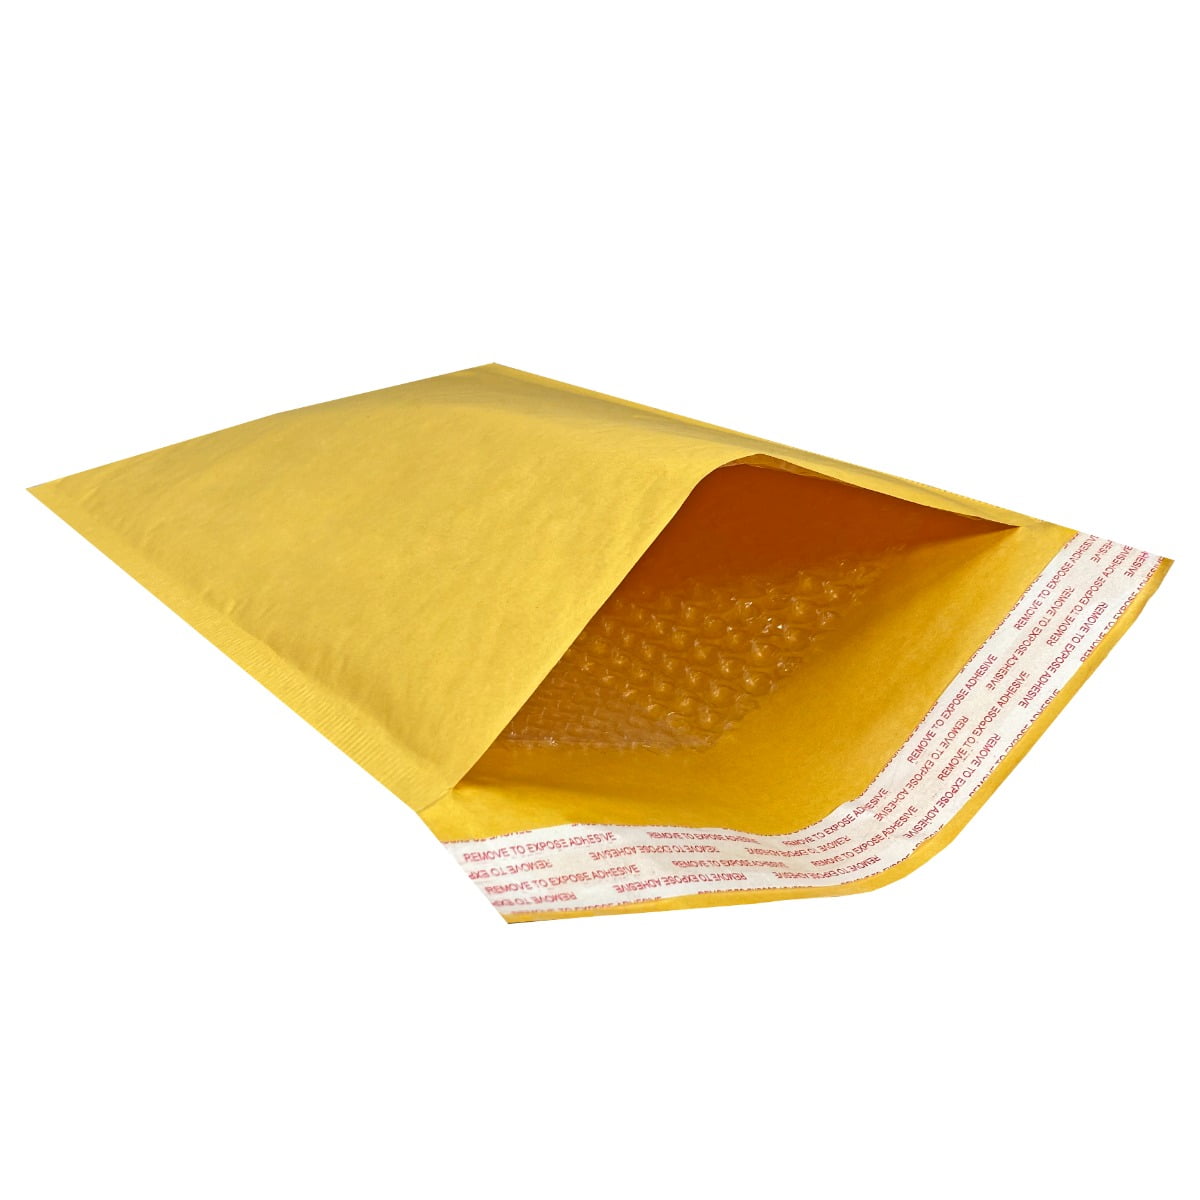 8.5X11 GOLD KRAFT BUBBLE MAILER PADDED ENVELOPES BUBBLE MAILERS #2 FREE SHIPPING 